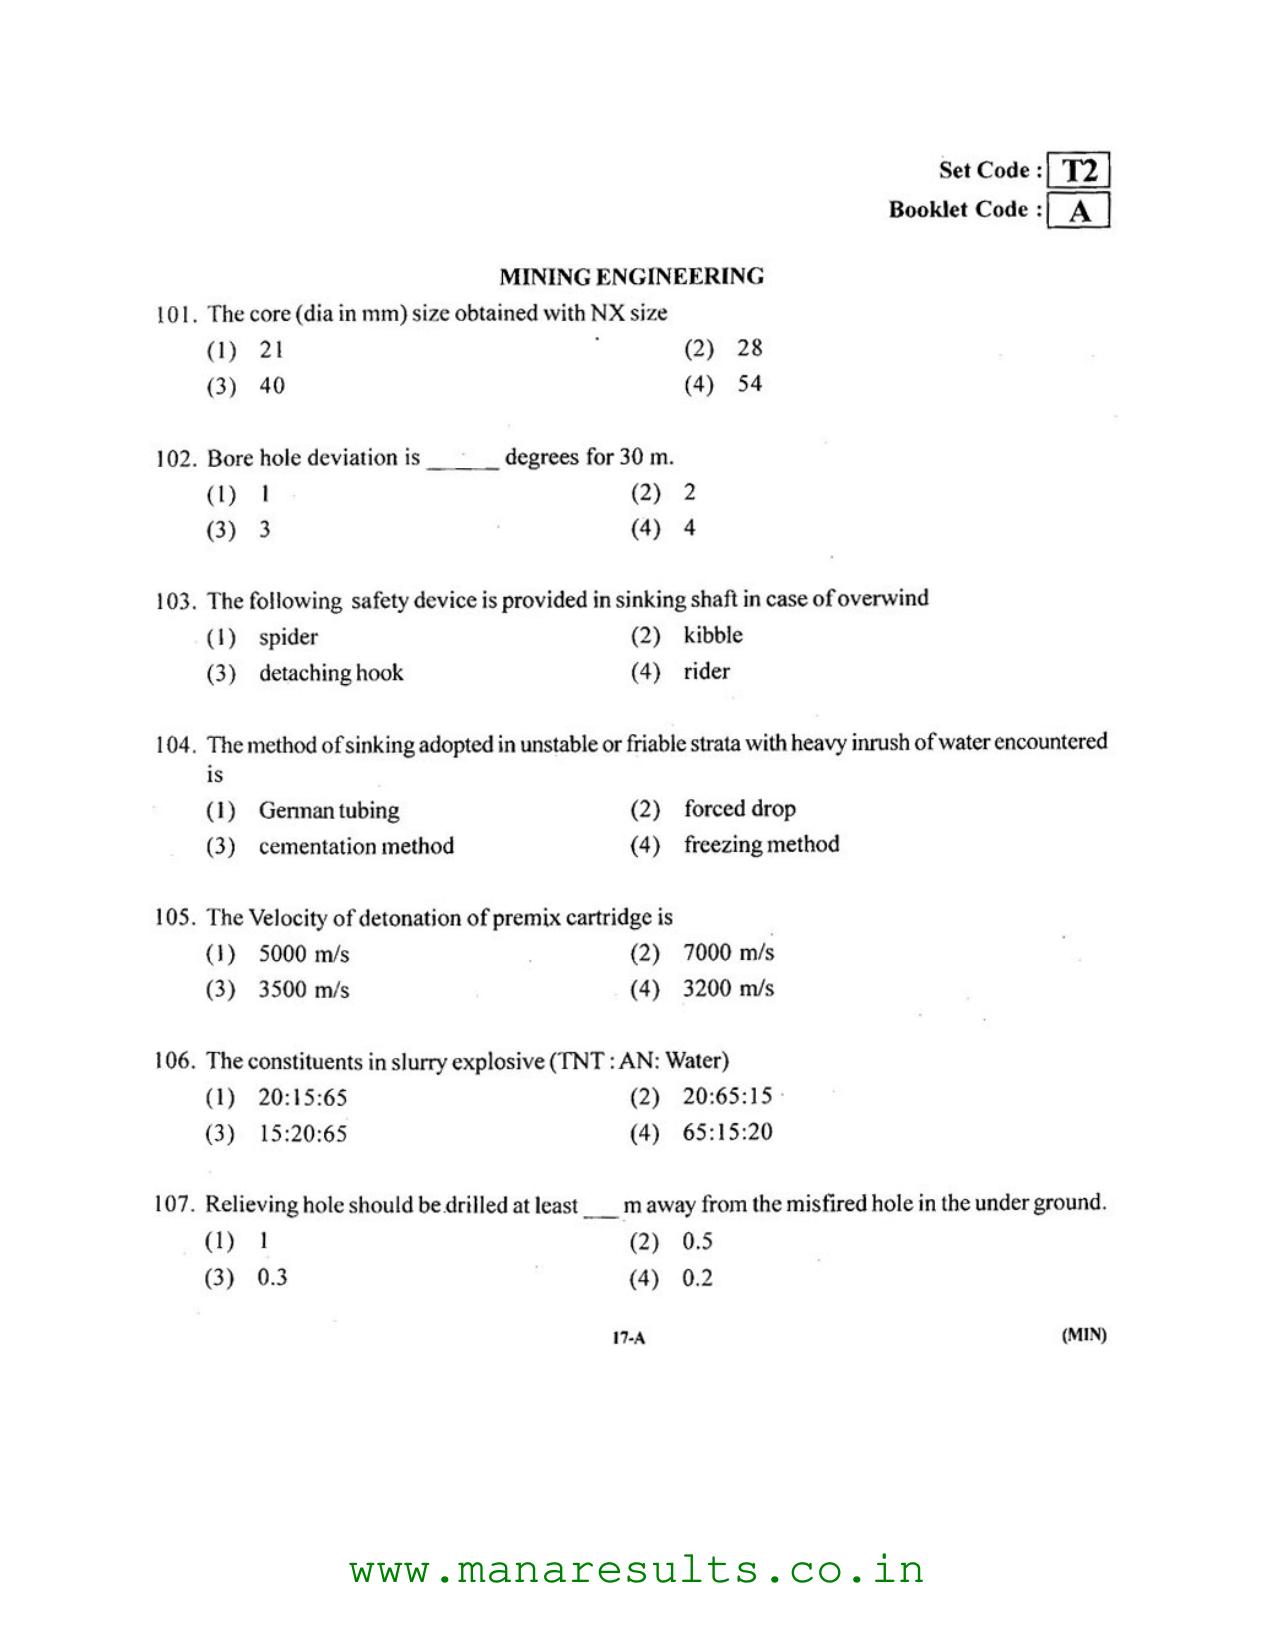 AP ECET 2016 Mining Engineering Old Previous Question Papers - Page 16